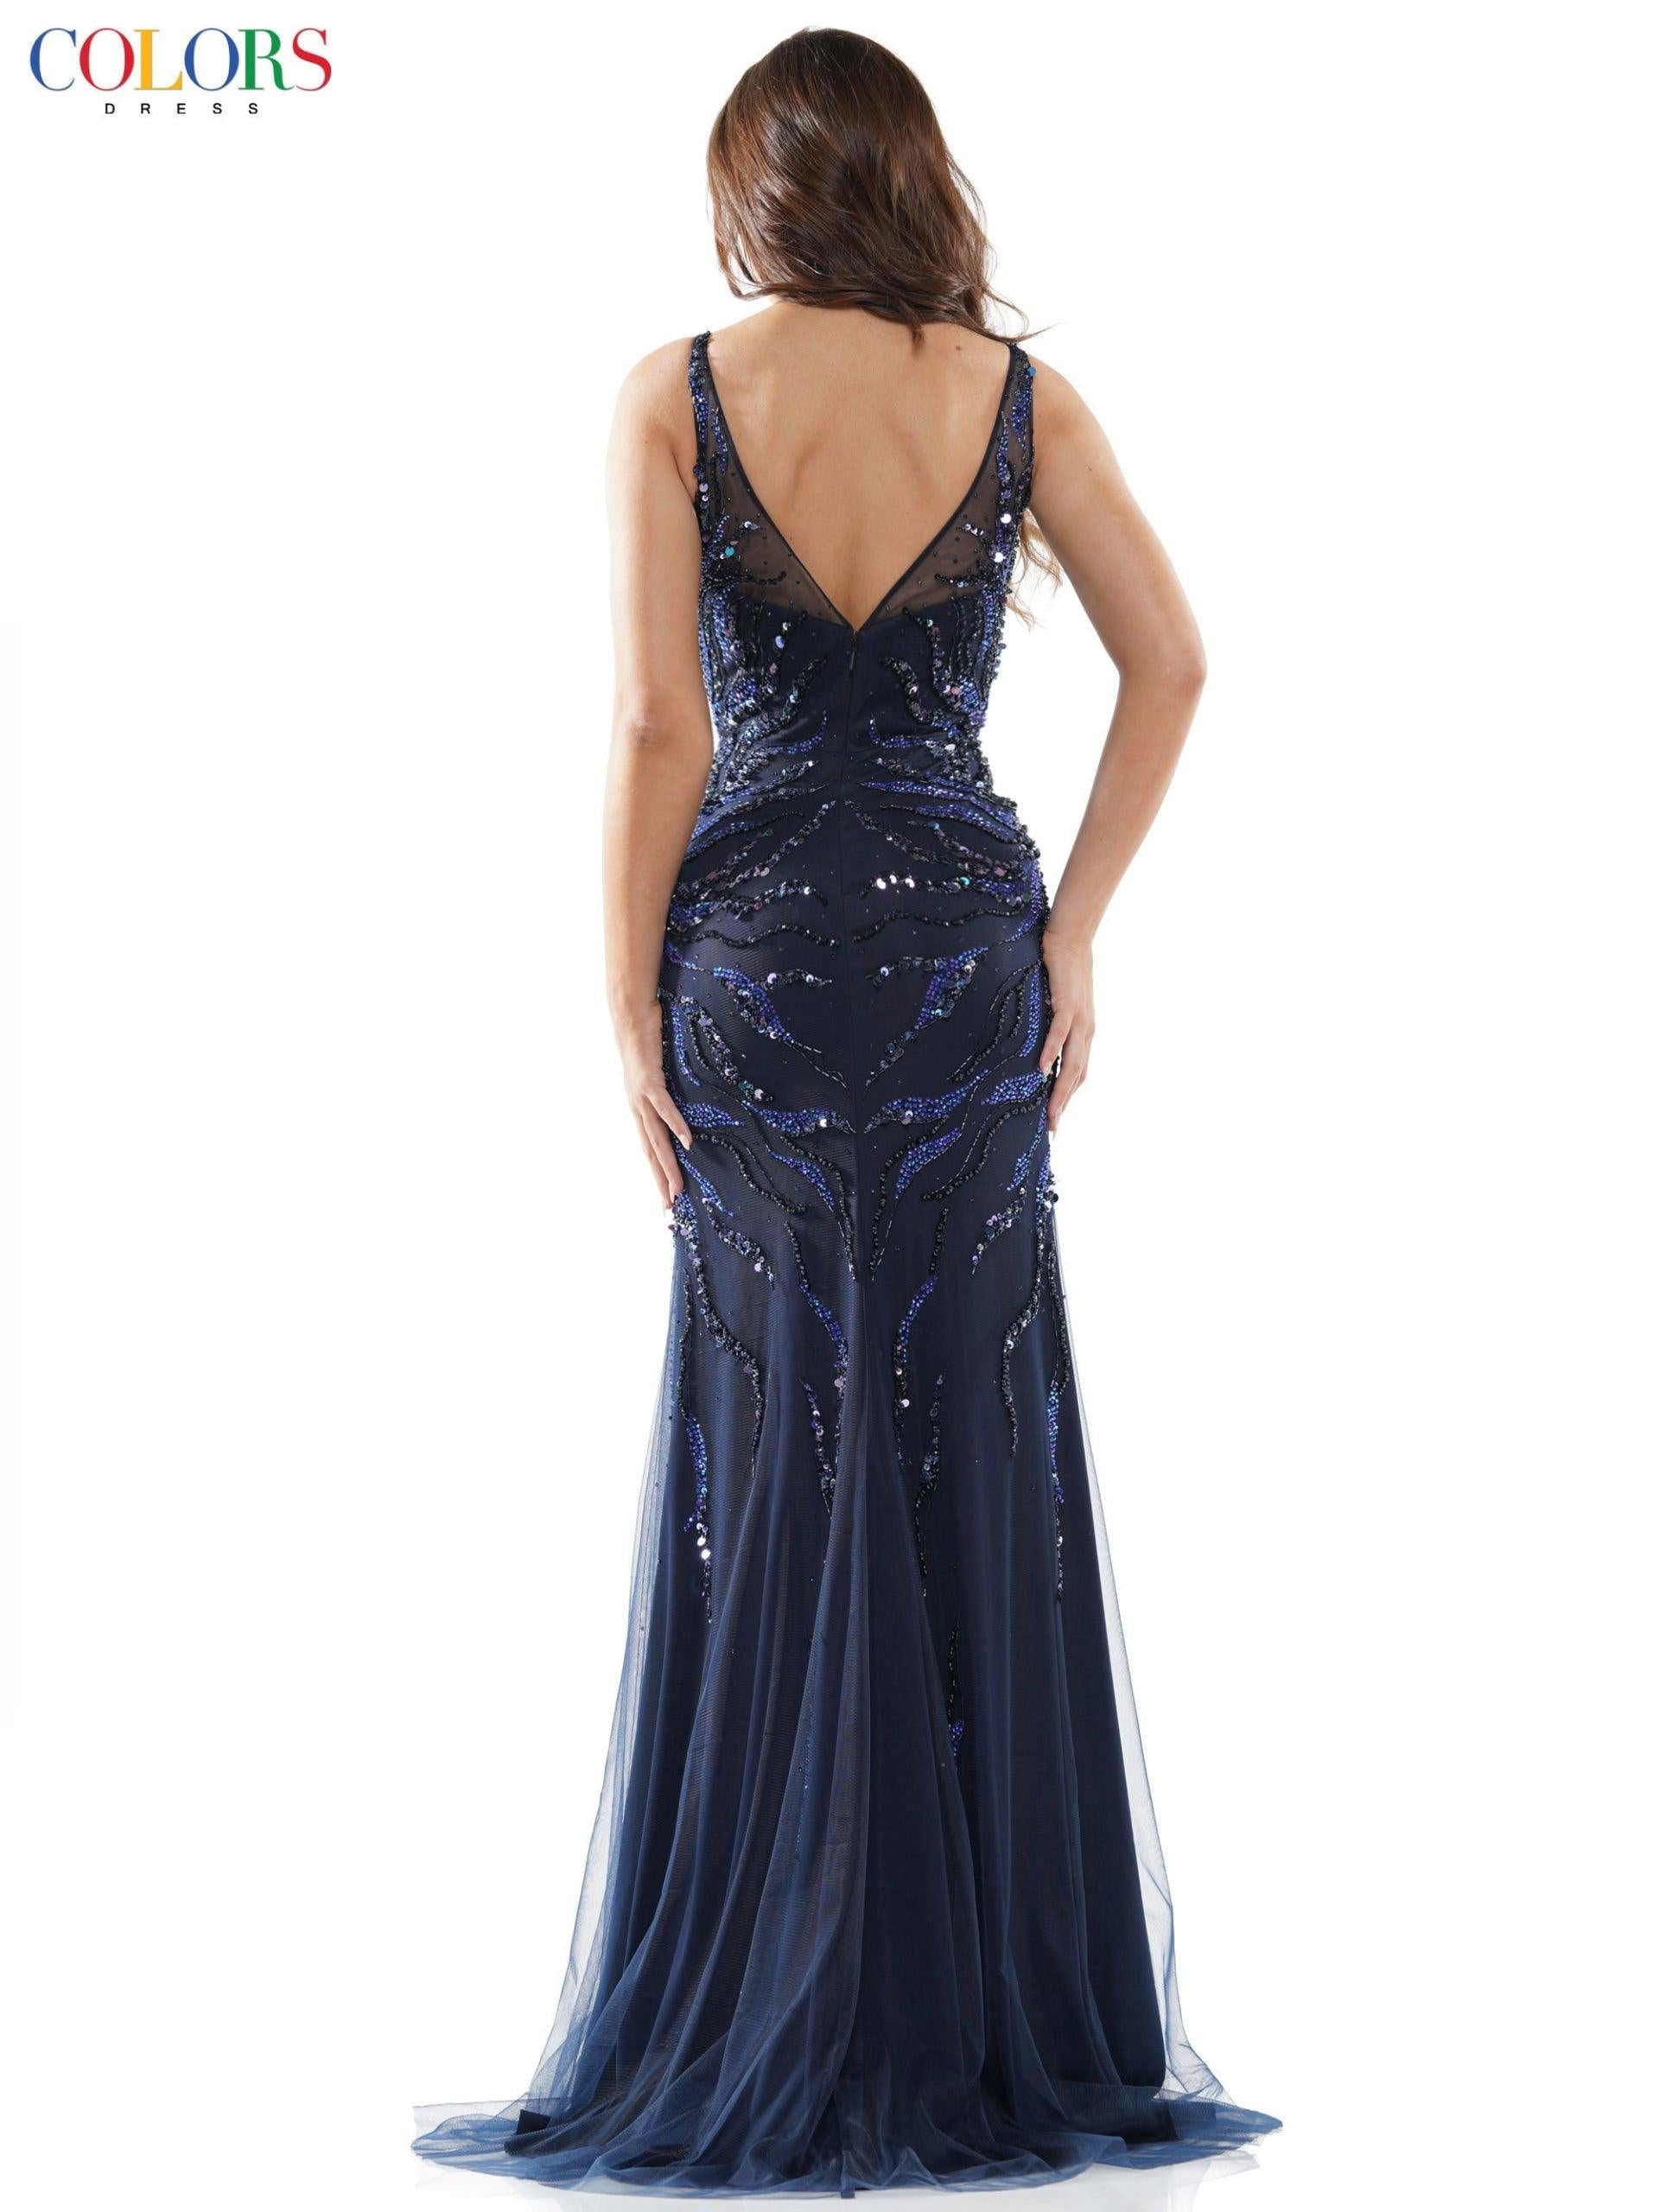 Colors Long Sleeveless Fitted Prom Dress 2651 - The Dress Outlet